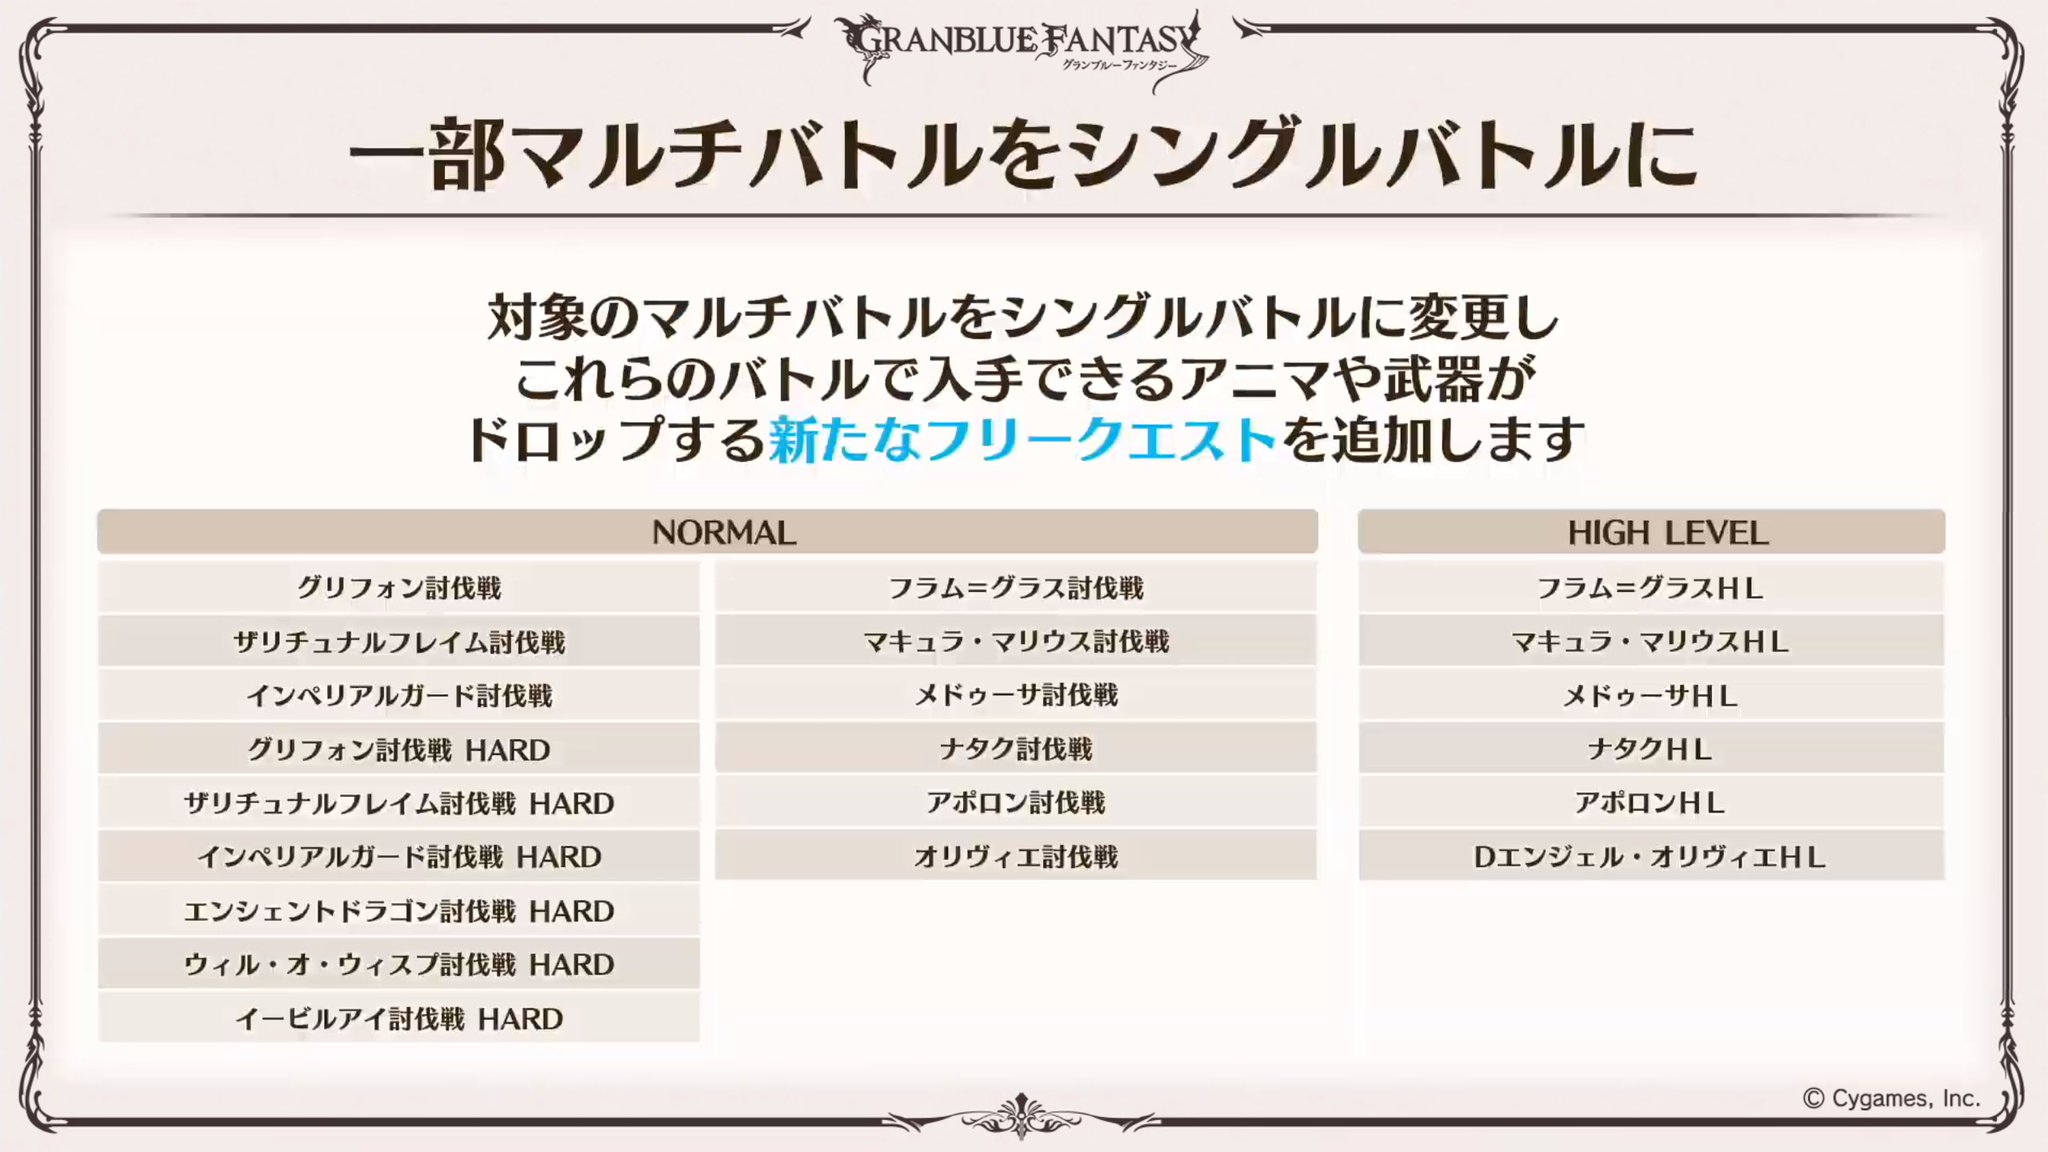 Granblue En Unofficial Many Raids Are Becoming Single Player Battles In Order To Avoid Spreading The Player Base Too Much In Raids This Includes The Nezha Tier T Co Rac8ulimd9